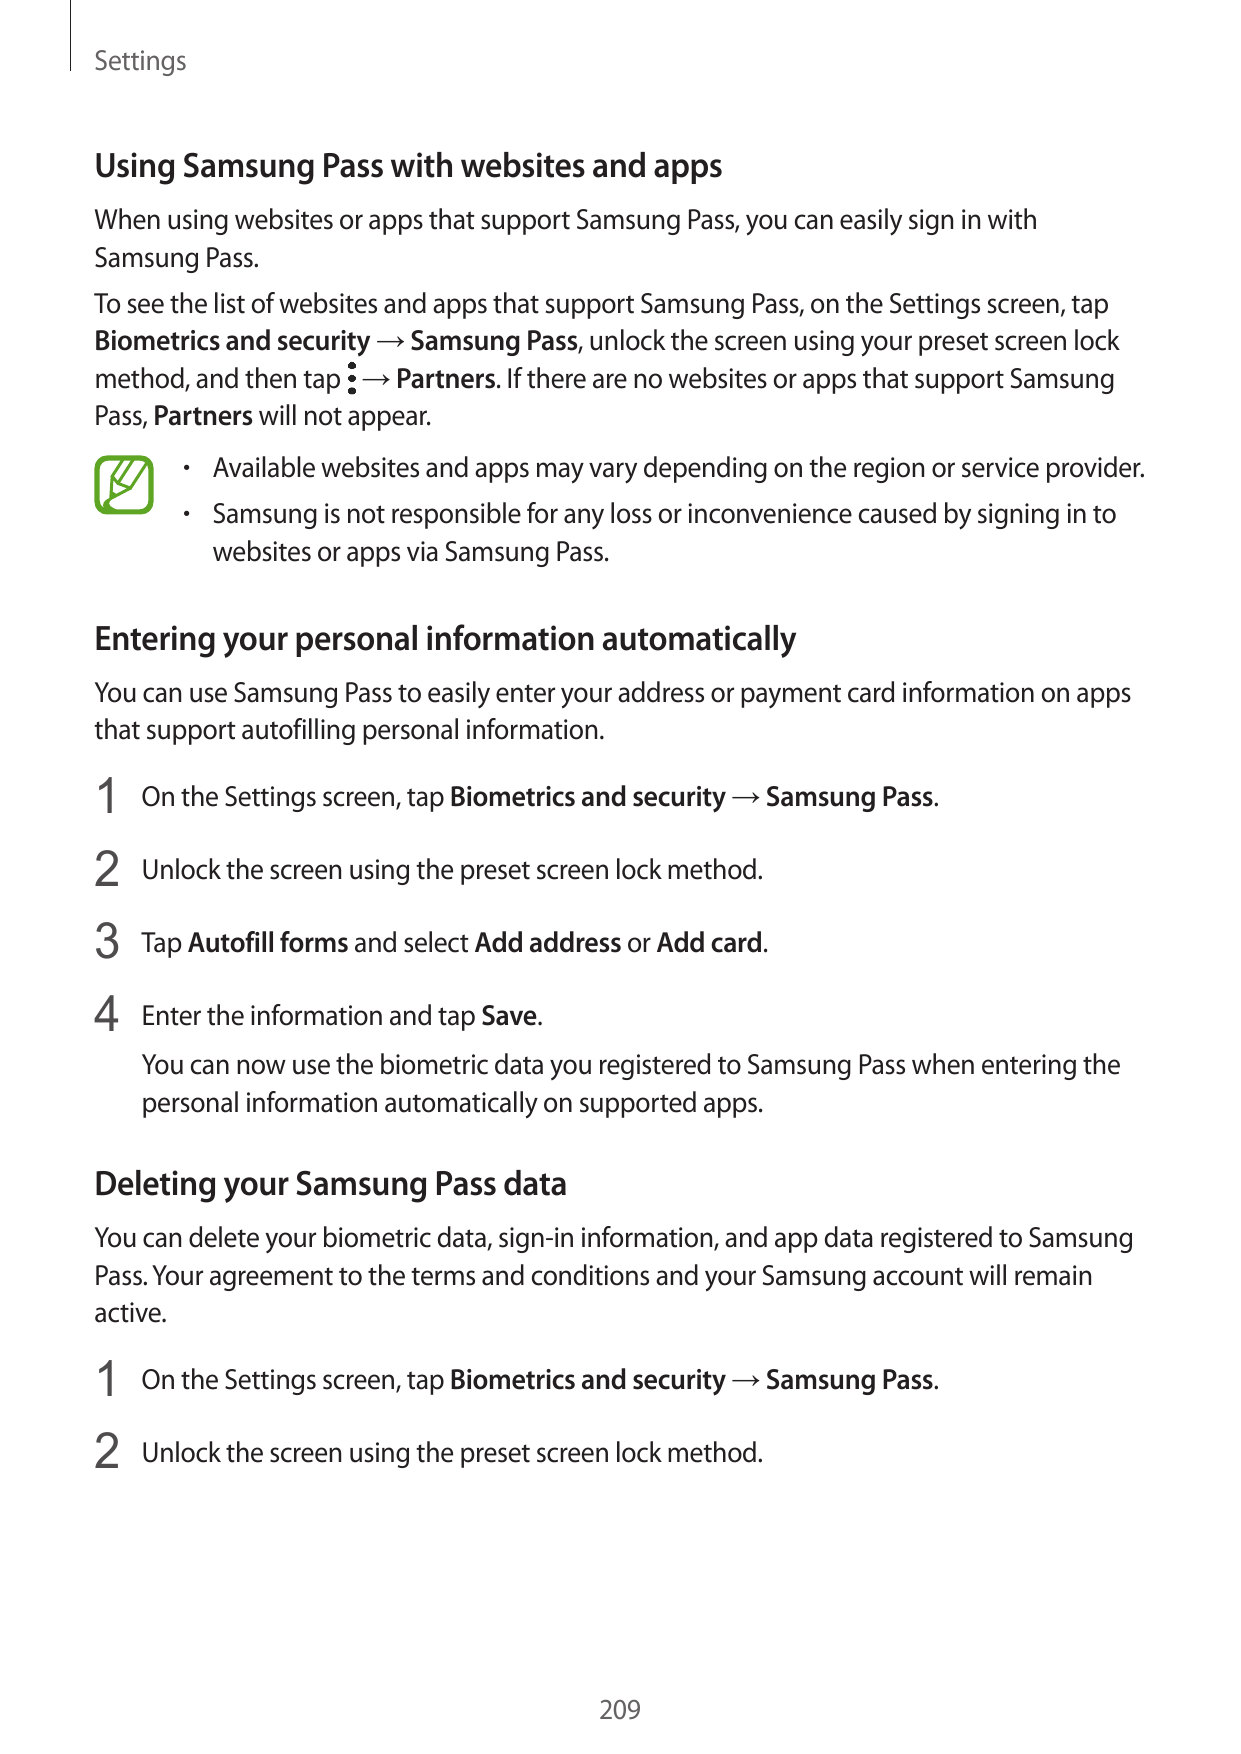 SettingsUsing Samsung Pass with websites and appsWhen using websites or apps that support Samsung Pass, you can easily sign in w